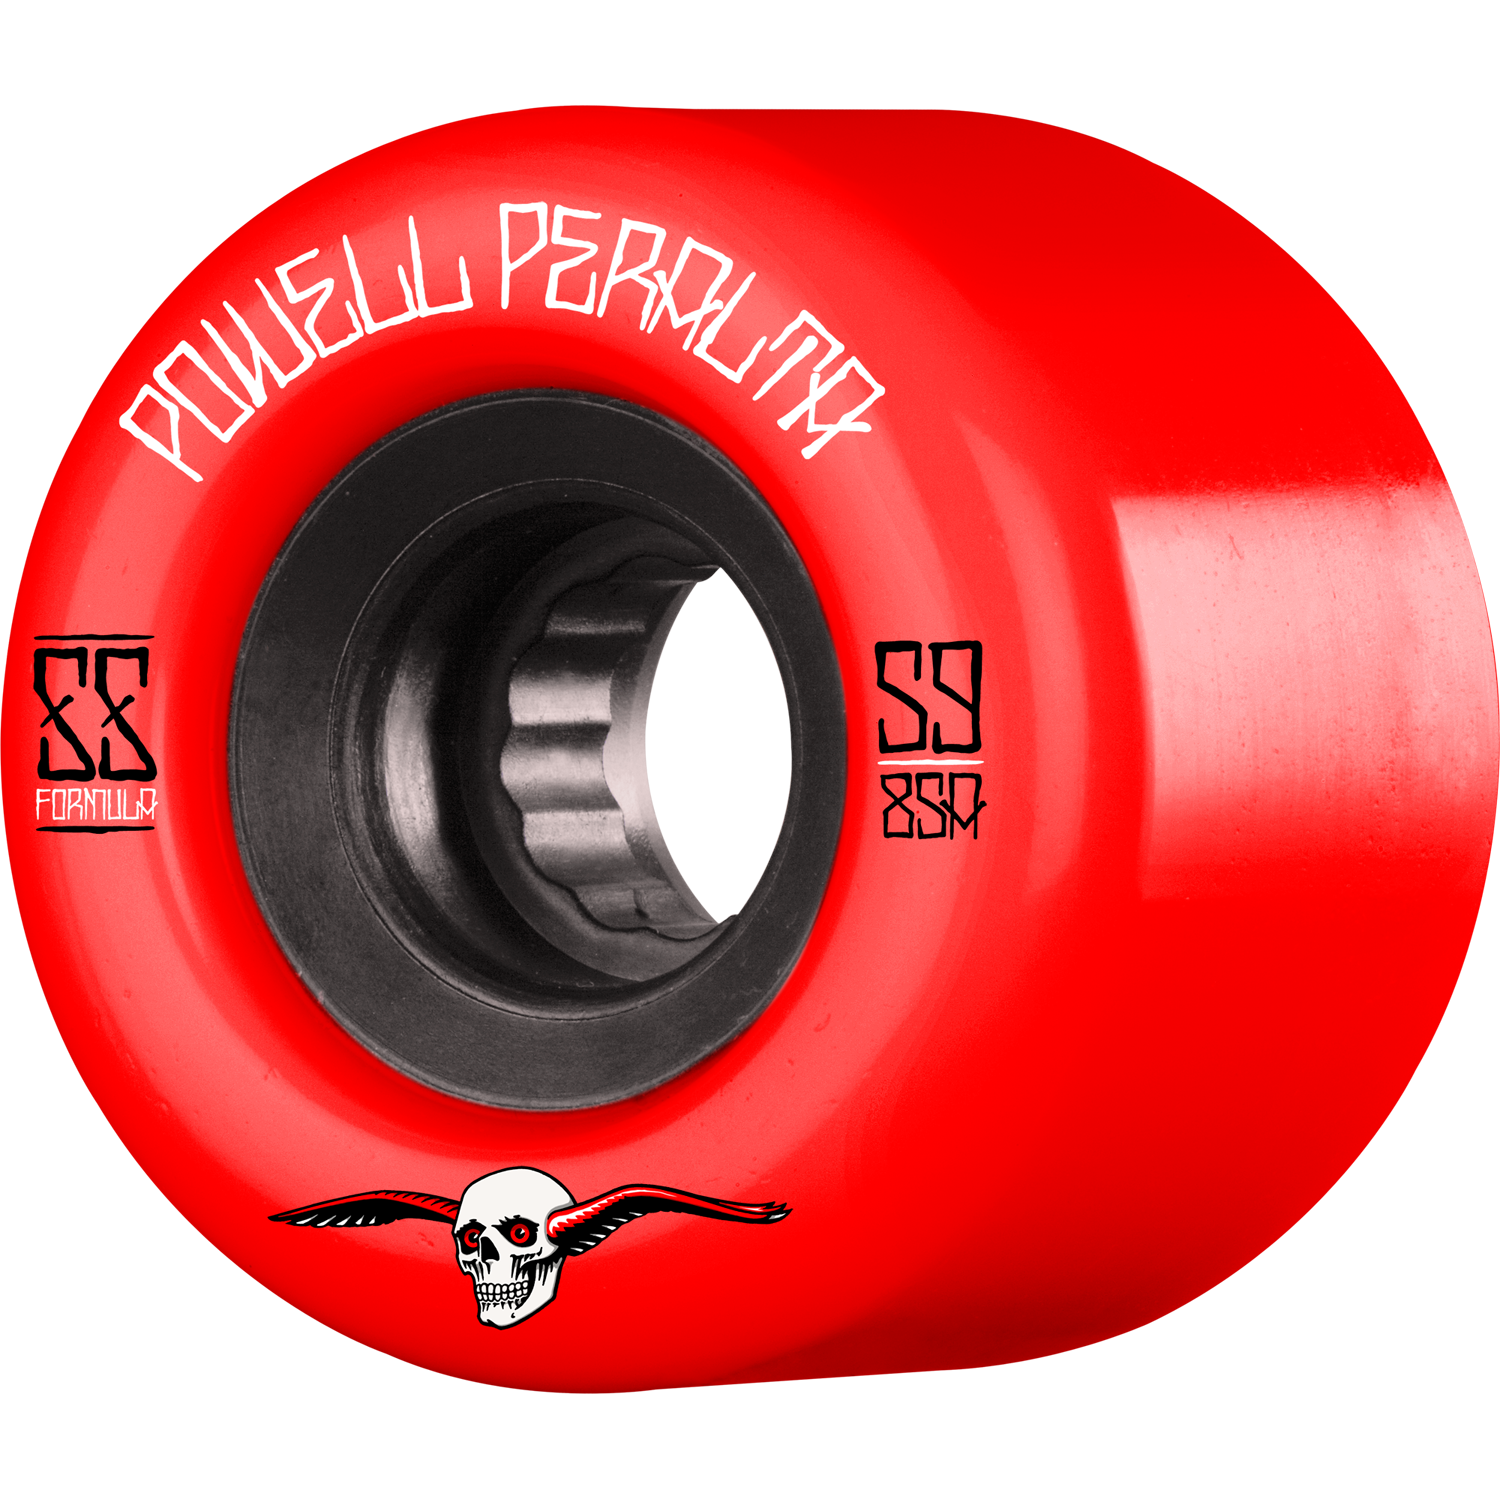 Powell Peralta G-Slides 59mm 85a Red/Black Skateboard Wheels (Set of 4) | Universo Extremo Boards Skate & Surf